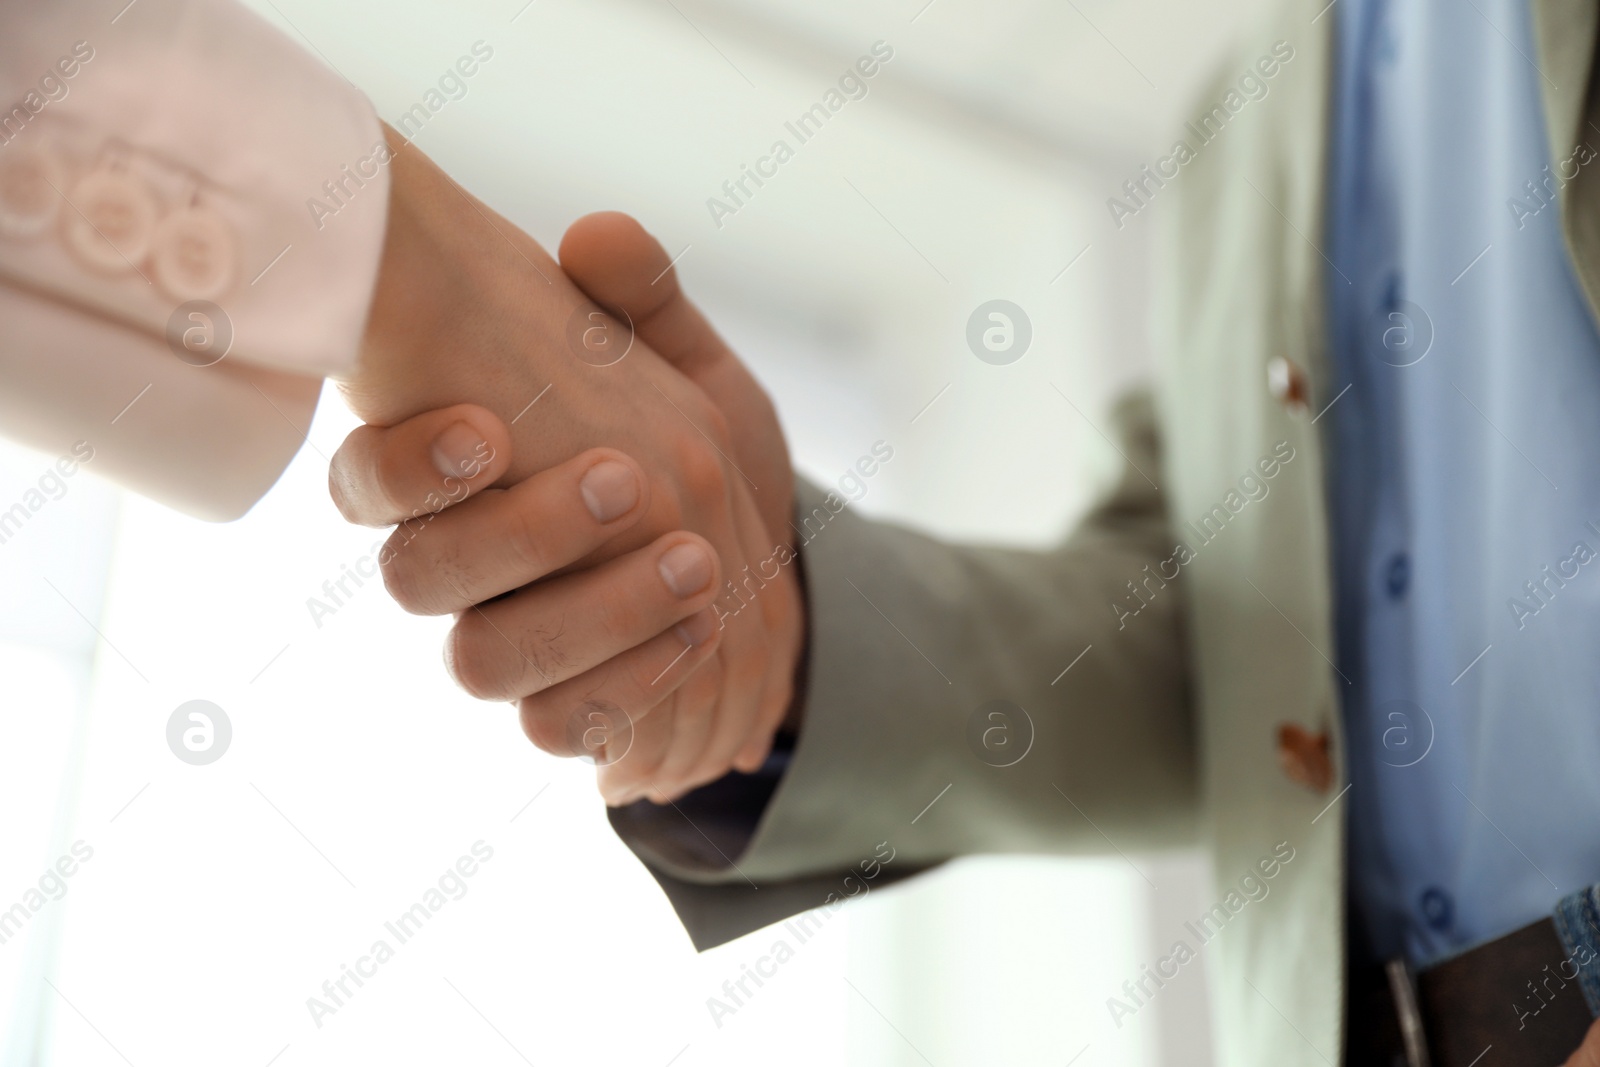 Photo of Business partners shaking hands after meeting, closeup